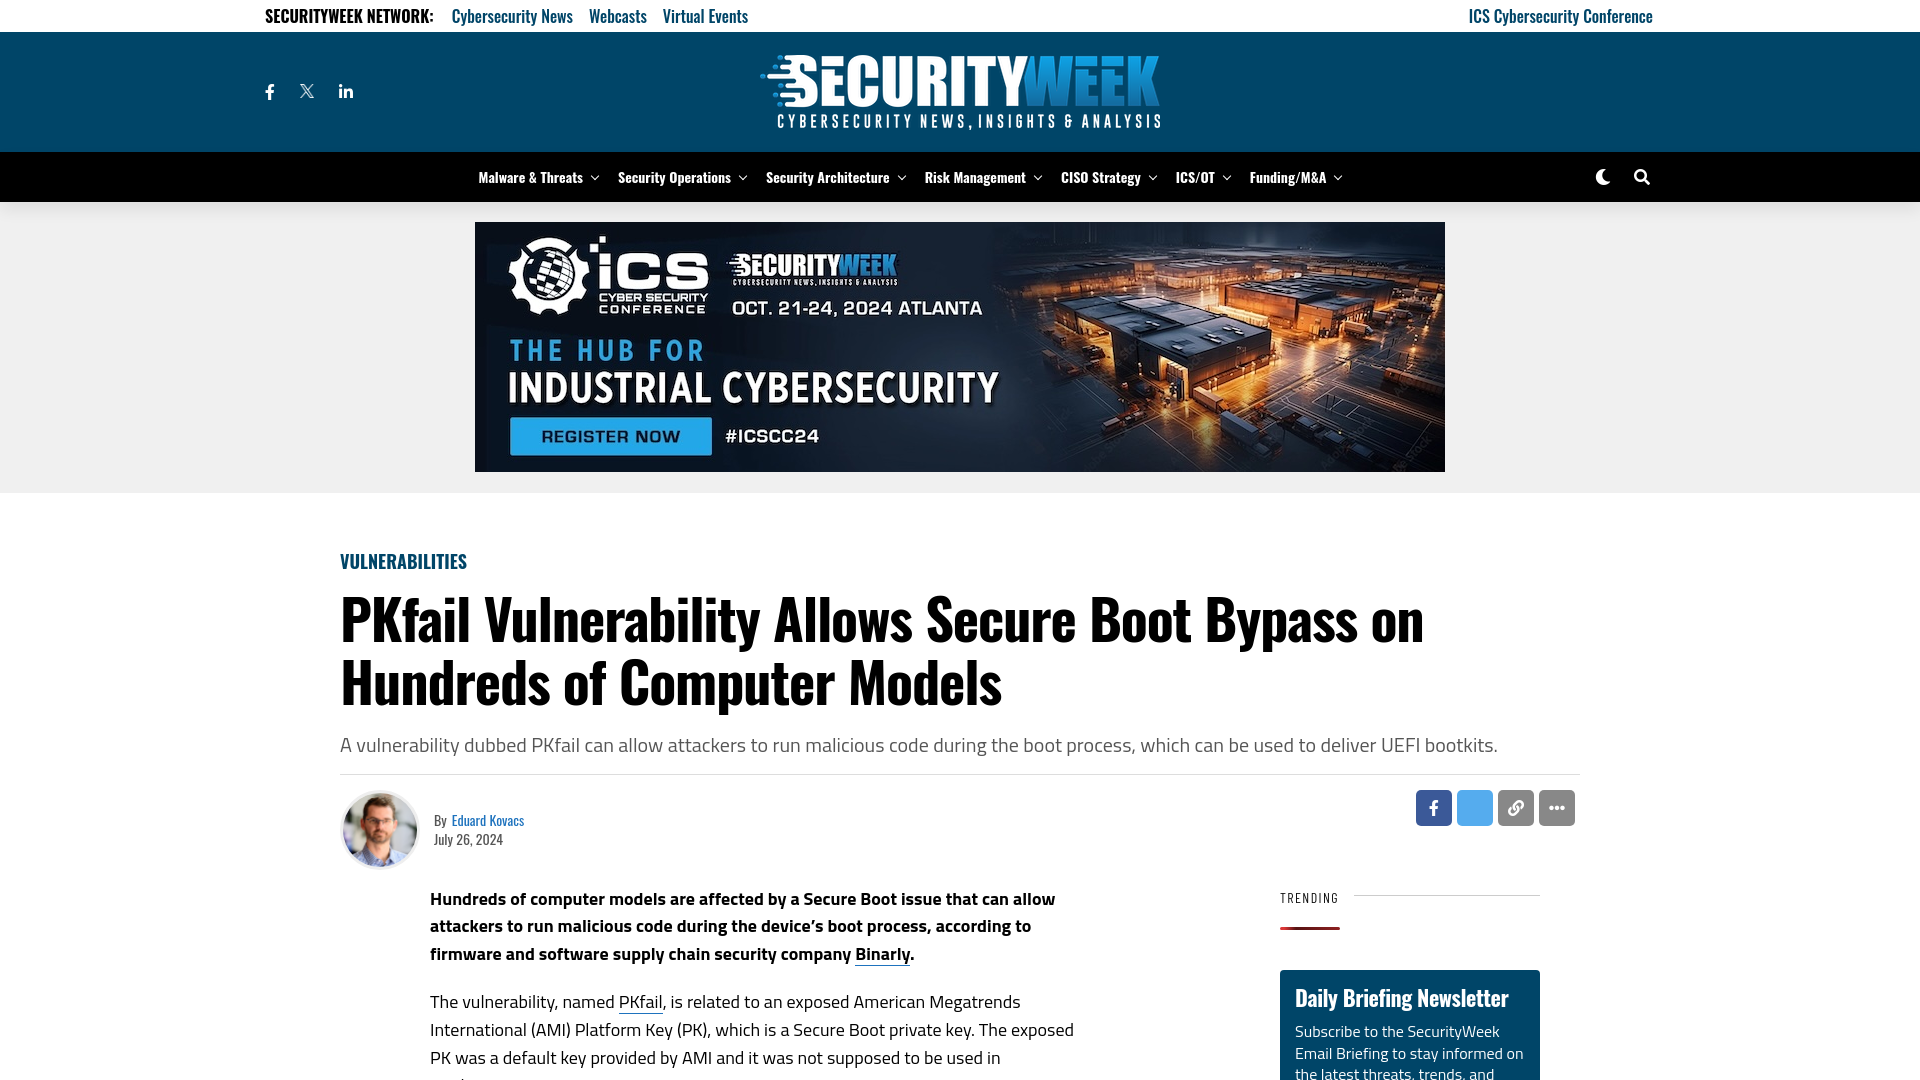 PKfail Vulnerability Allows Secure Boot Bypass on Hundreds of Computer Models  - SecurityWeek